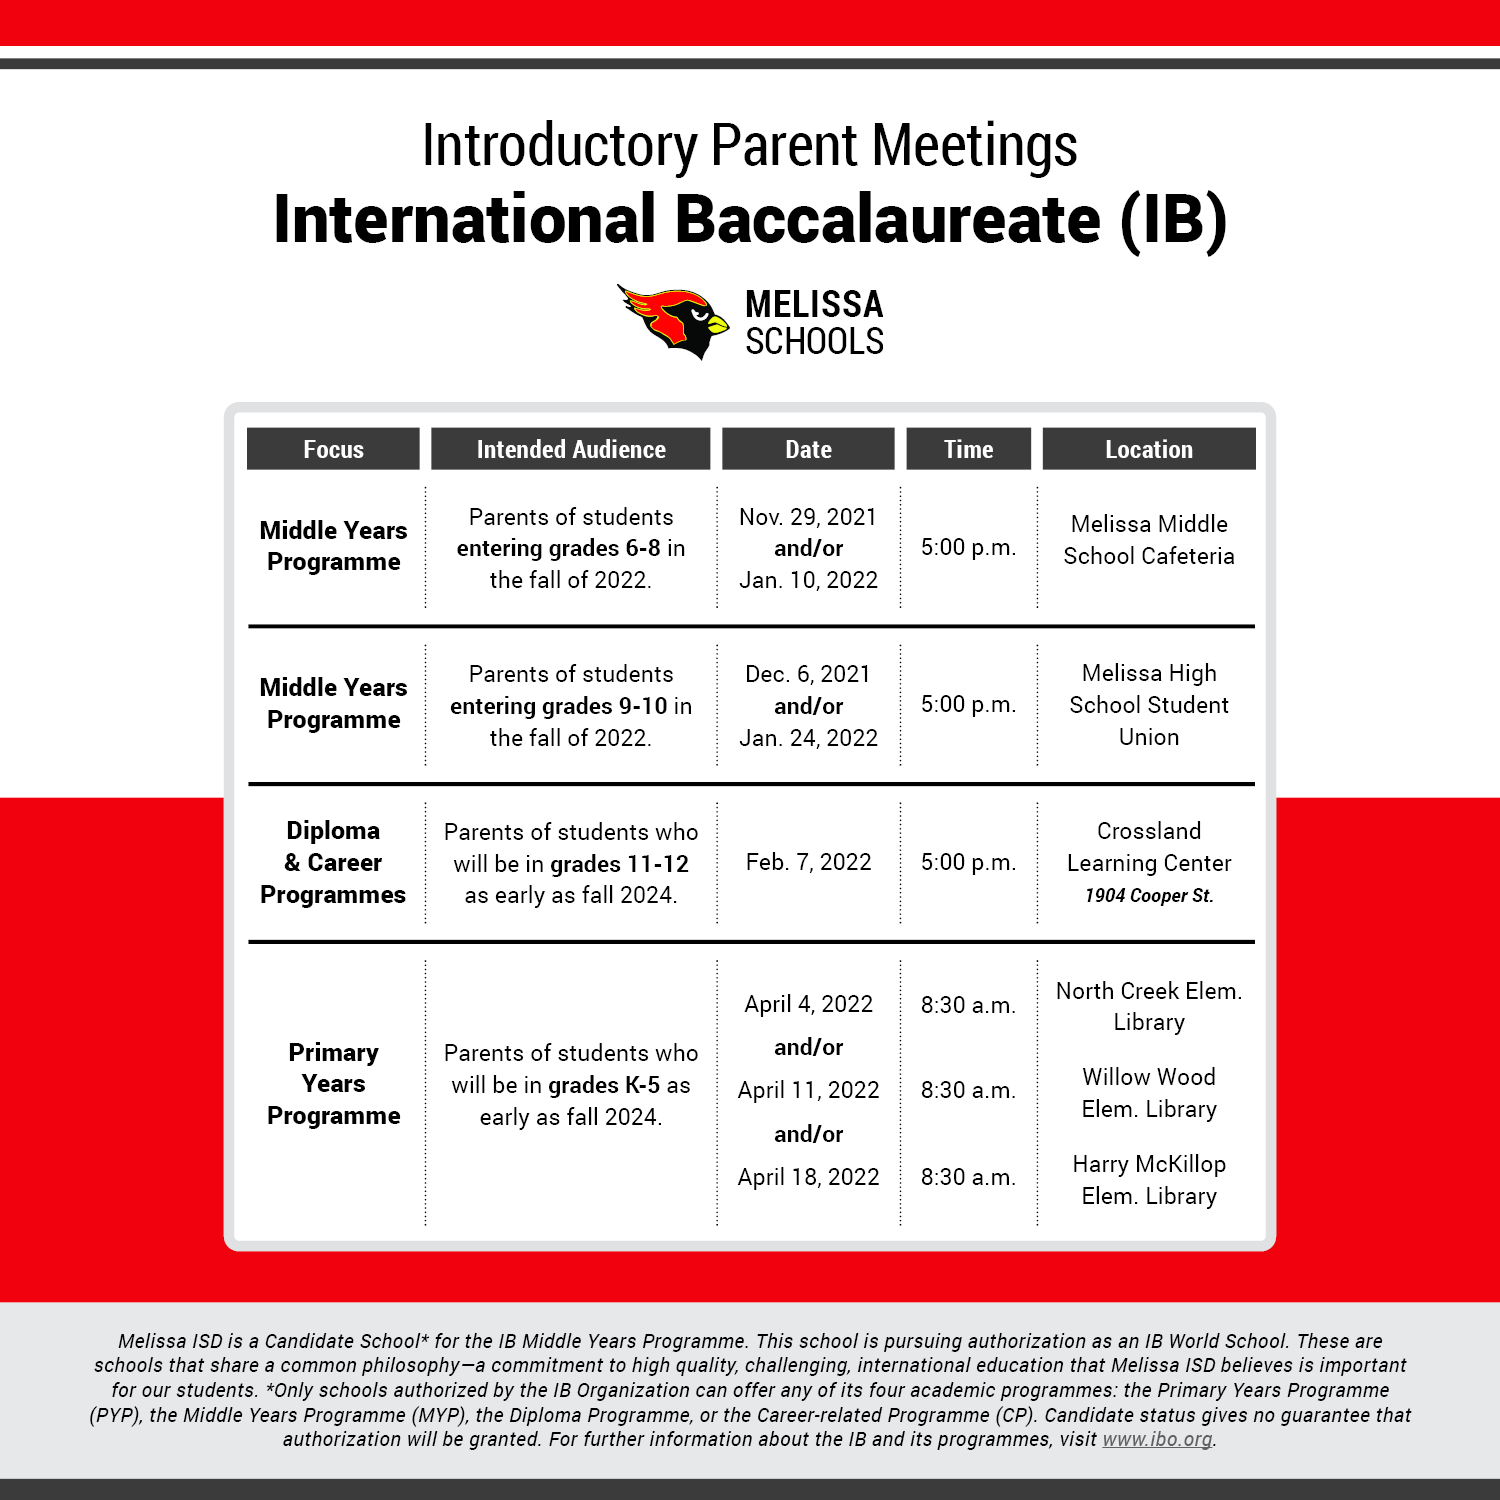 a graphic with information about upcoming IB meetings at Melissa ISD